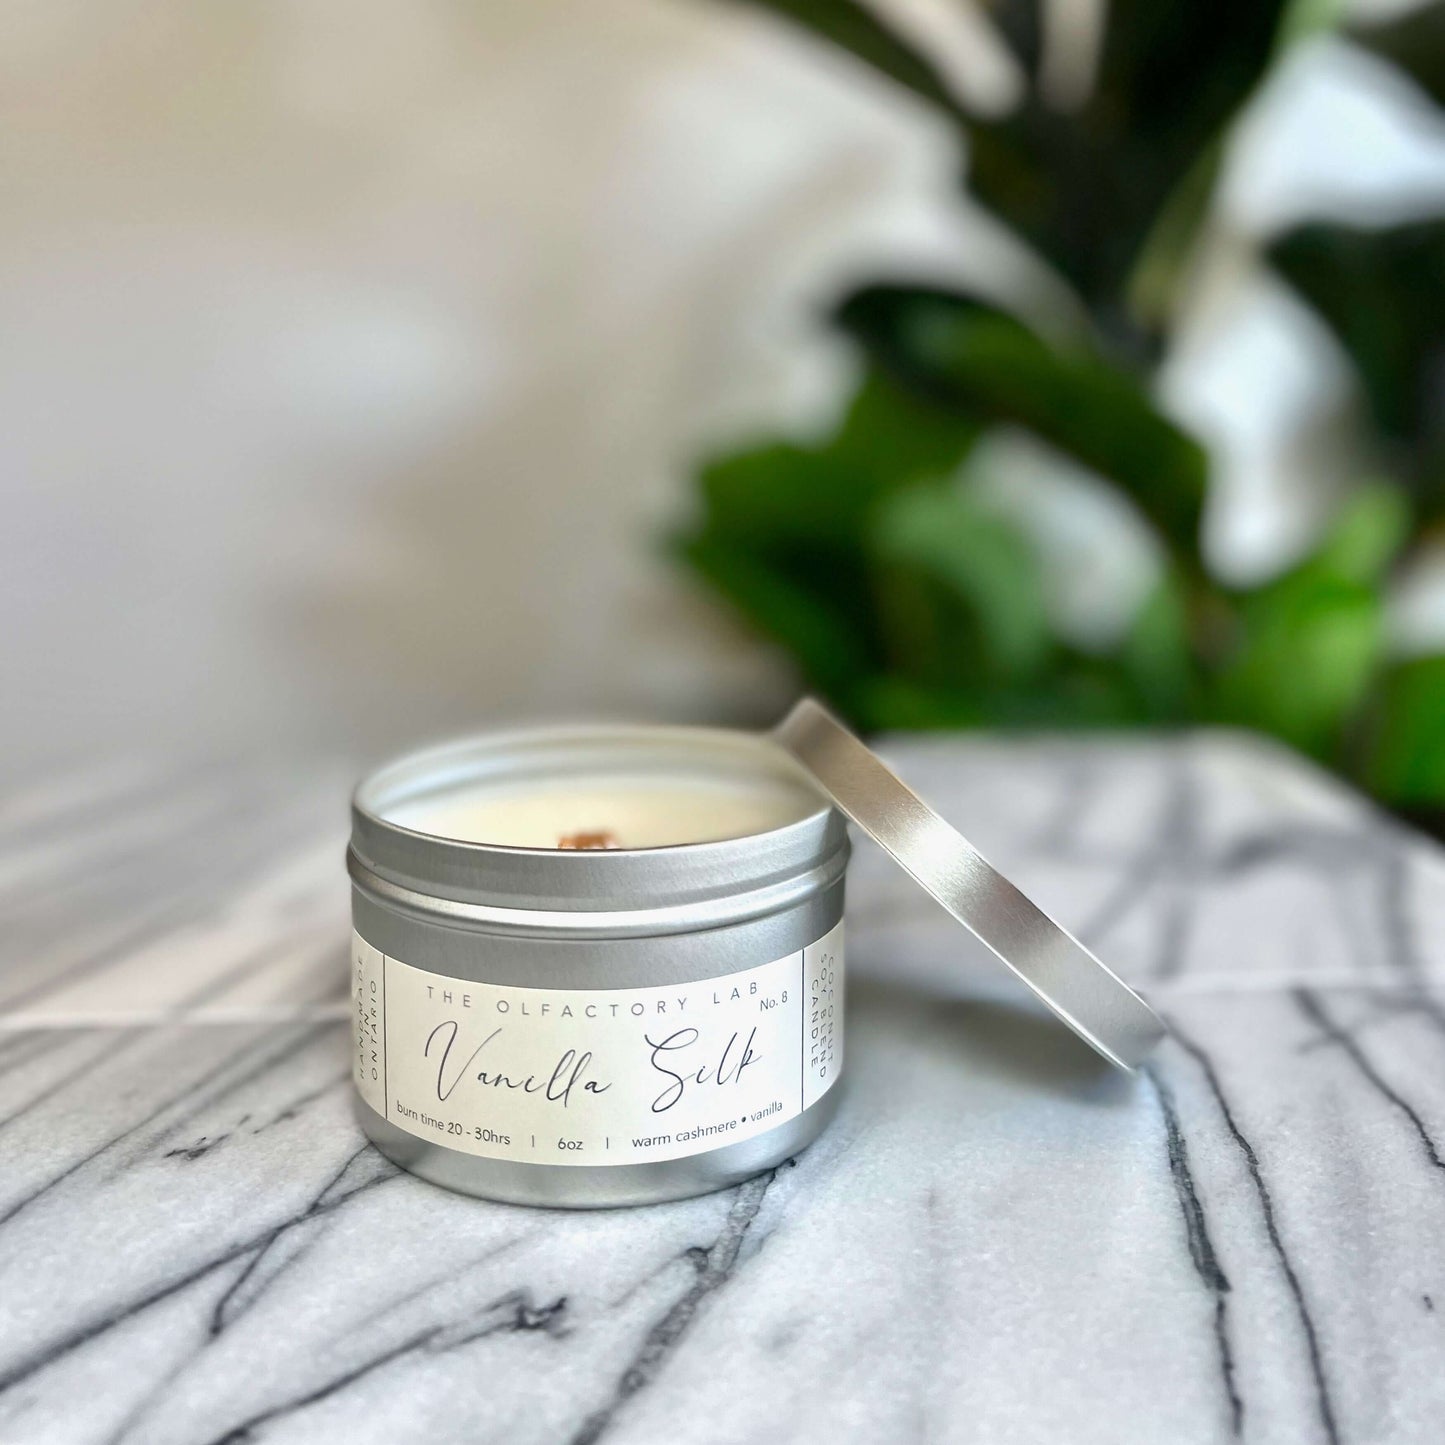 
                  
                    A 6oz candle in a silver tin. The candle label is a rectangle shape in a soft yellow with grey cursive font reading Vanilla Silk. The candle is displayed on a white and grey marble table with greenery in the background. The candle lid is placed on the right side of the candle to display the wood wick.
                  
                